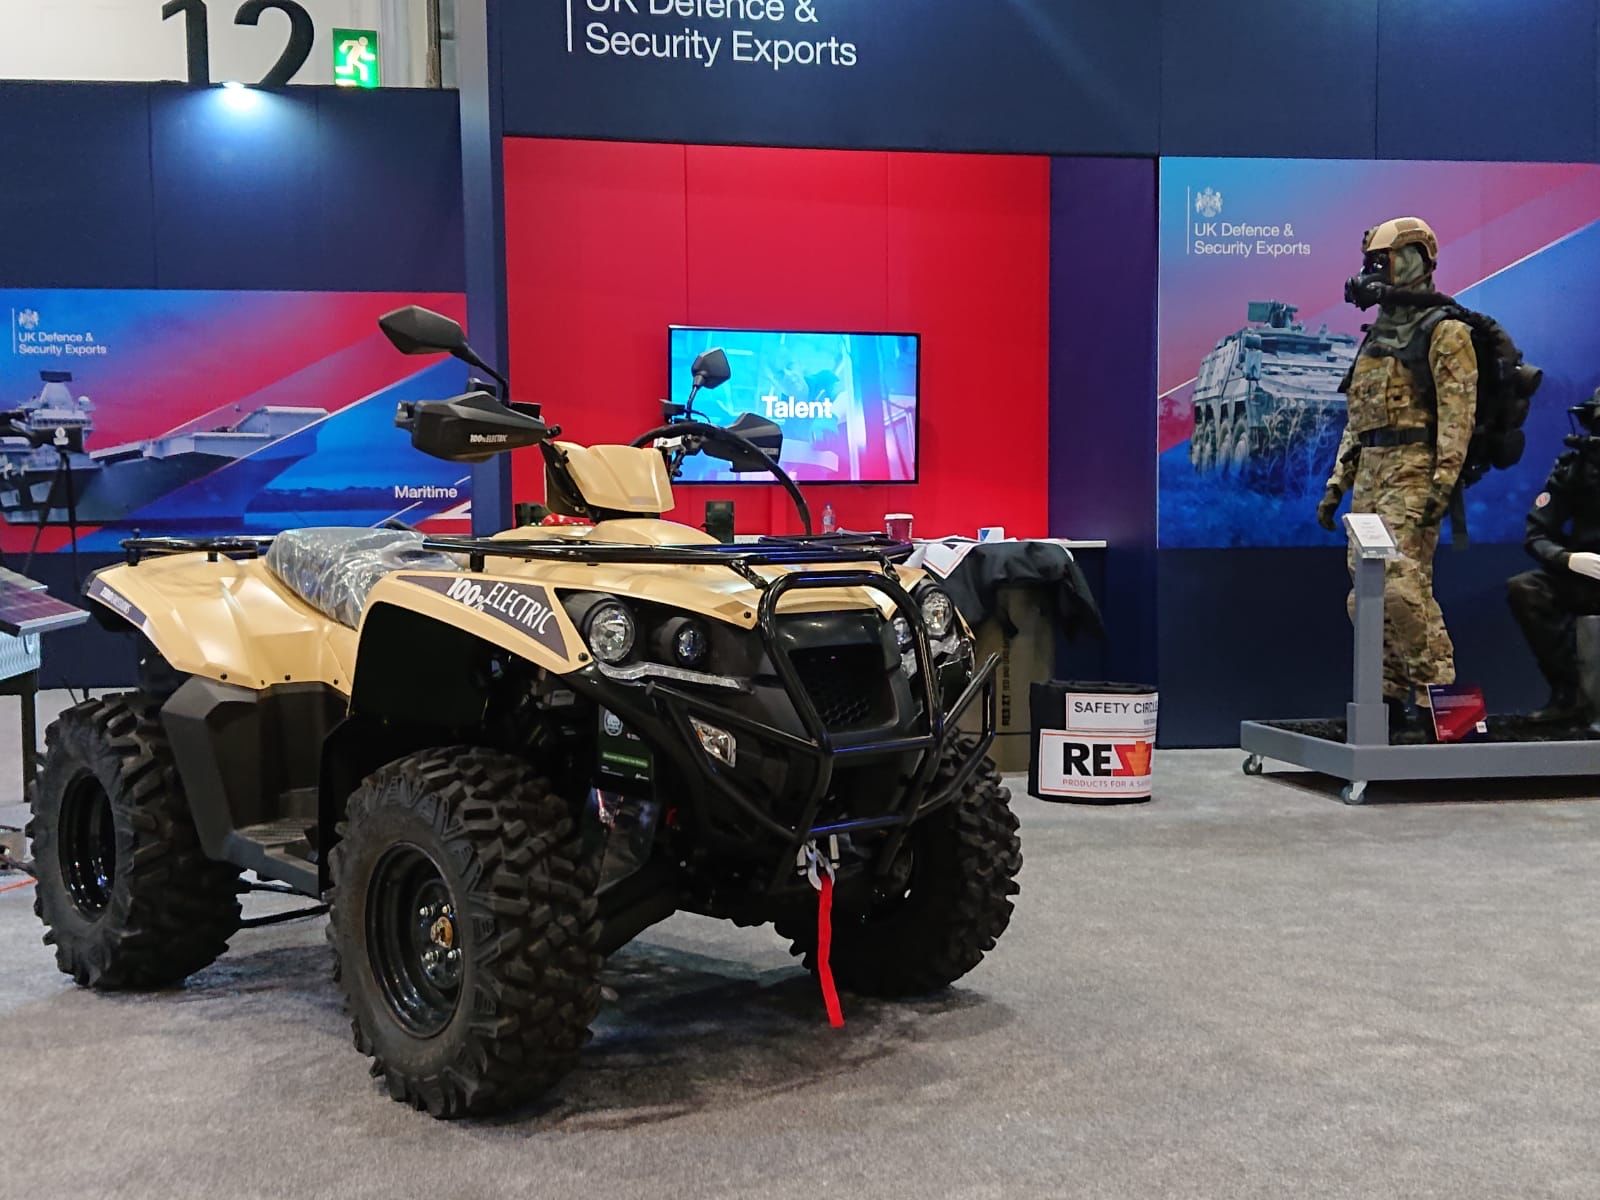 Supacat and Eco Charger Partner to Unveil World’s First Military All-Electric Quad Bike